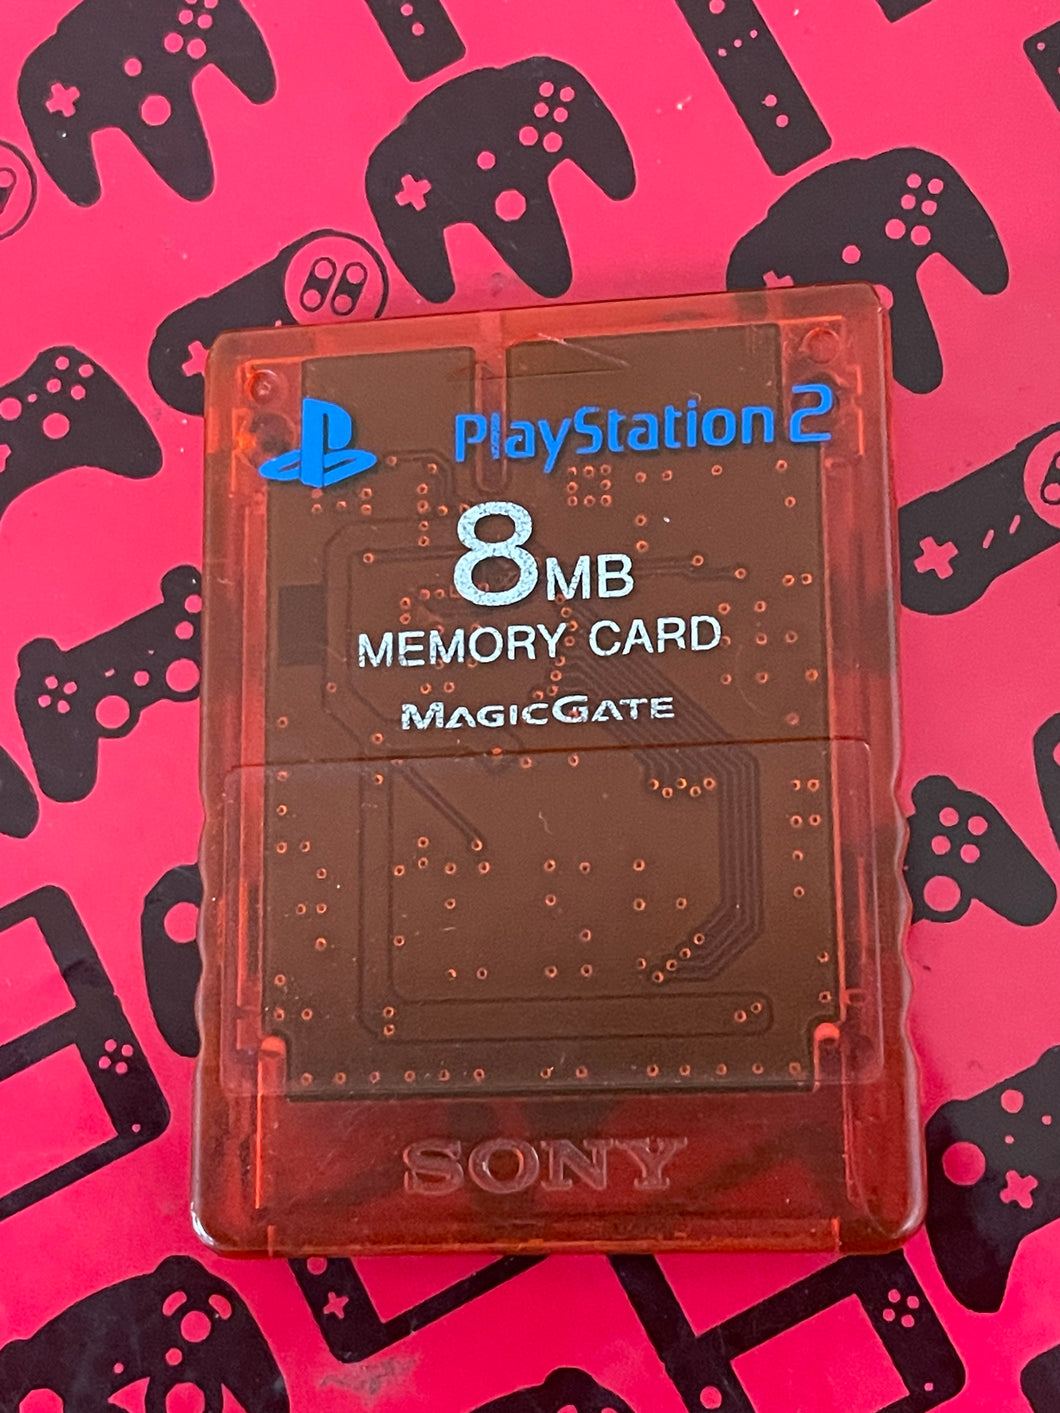 8Mb Memory Card Playstation 2 Sony MagicGate Crimson Red